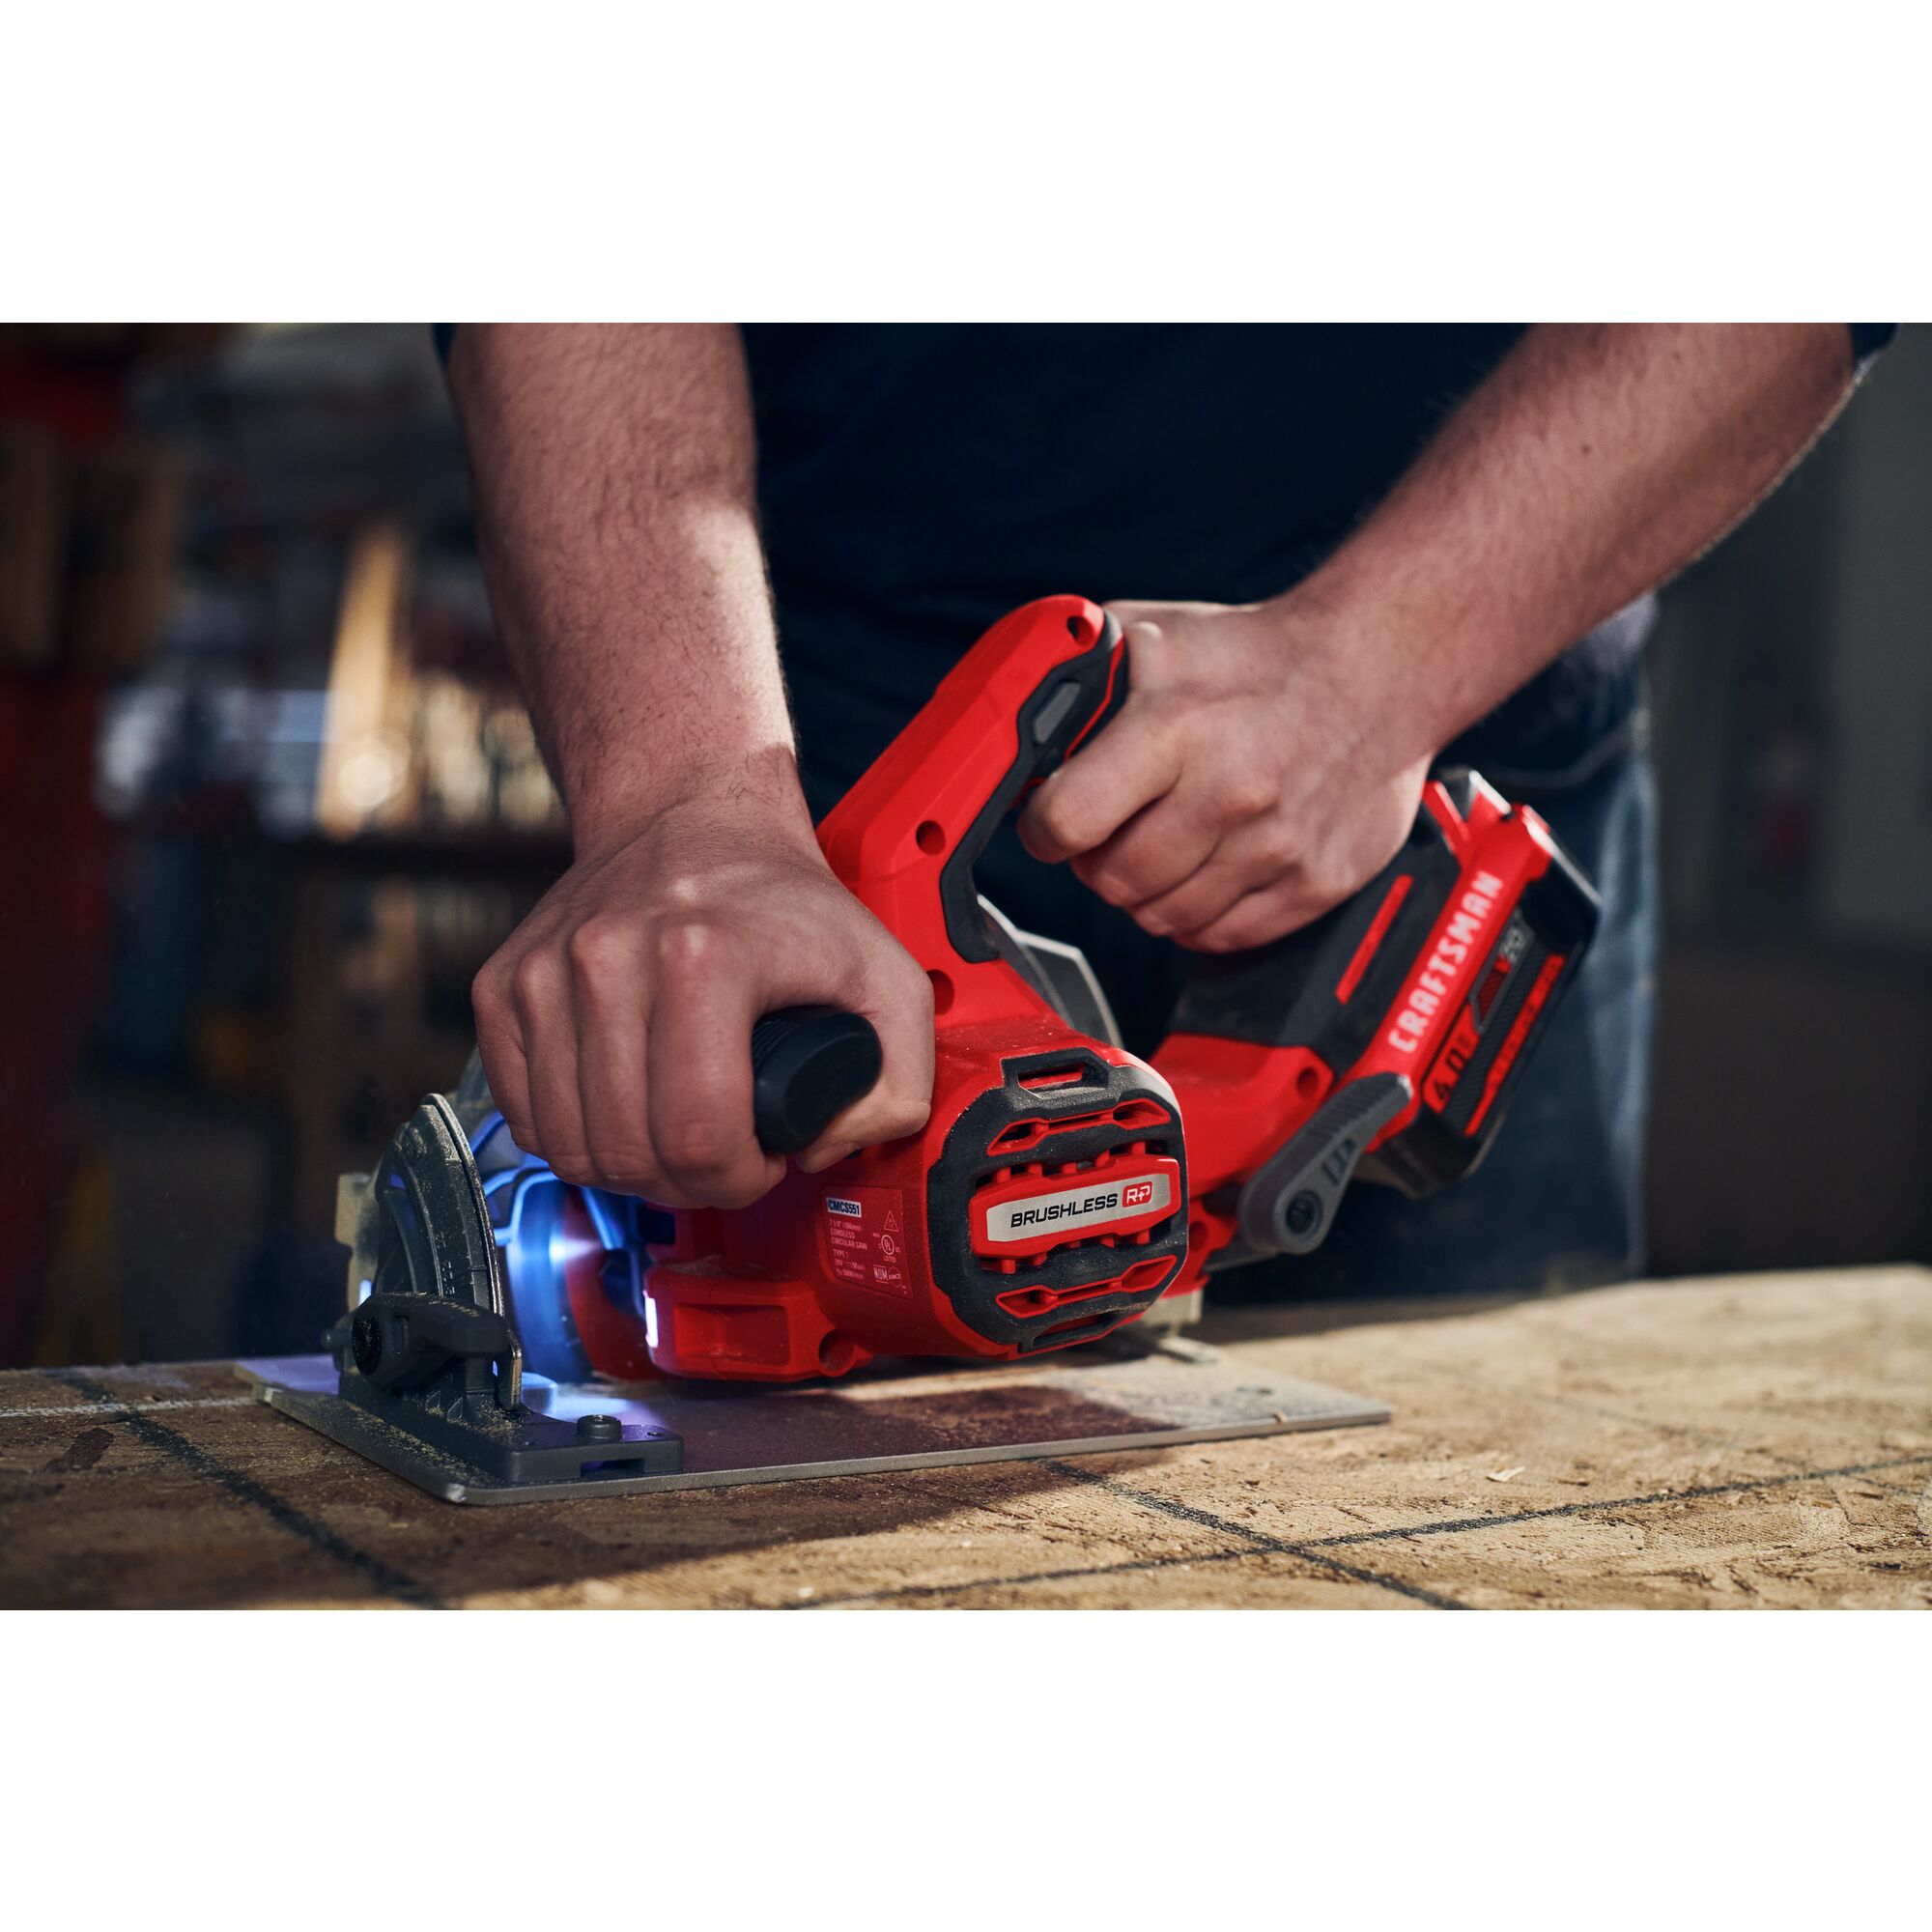 View of CRAFTSMAN Circular Saws  being used by consumer